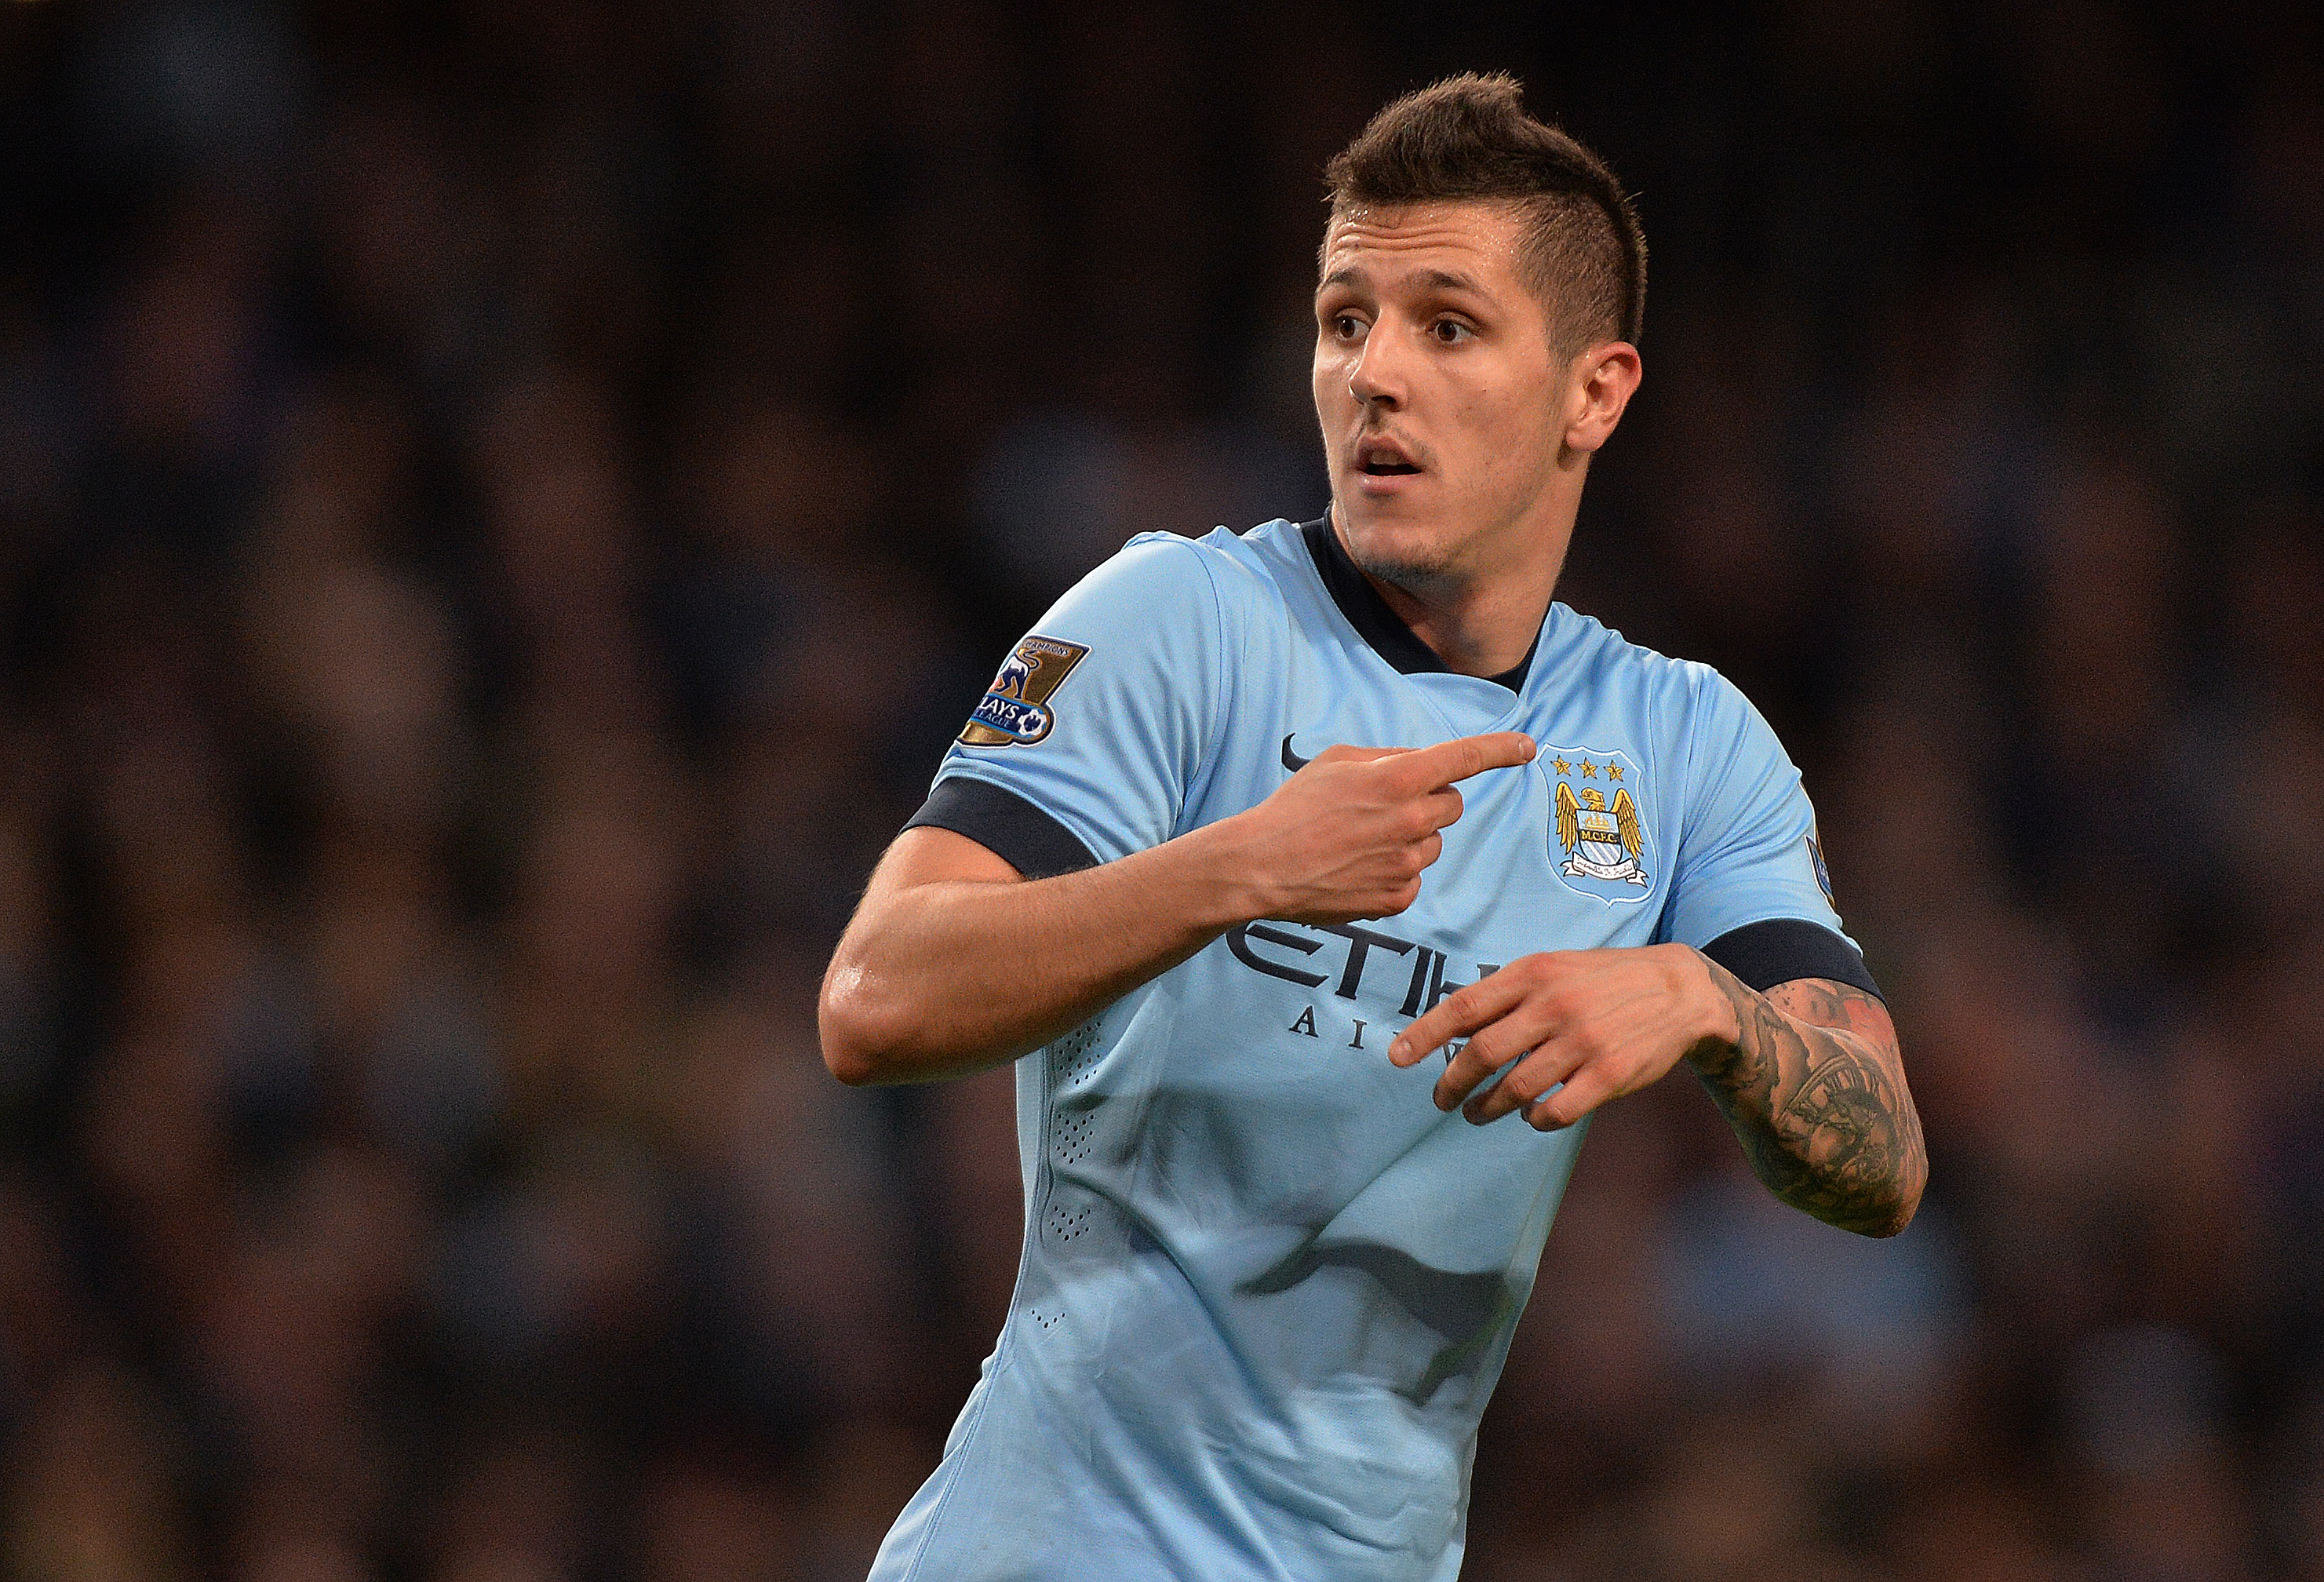 epa04499901 Manchester City's Stevan Jovetic during the English Premier League soccer match between Manchester City and Swansea City at the Etihad stadium in Manchester, Britain, 22 November 2014.  EPA/PETER POWELL DataCo terms and conditions apply 
http://www.epa.eu/files/Terms%20and%20Conditions/DataCo_Terms_and_Conditions.pdf